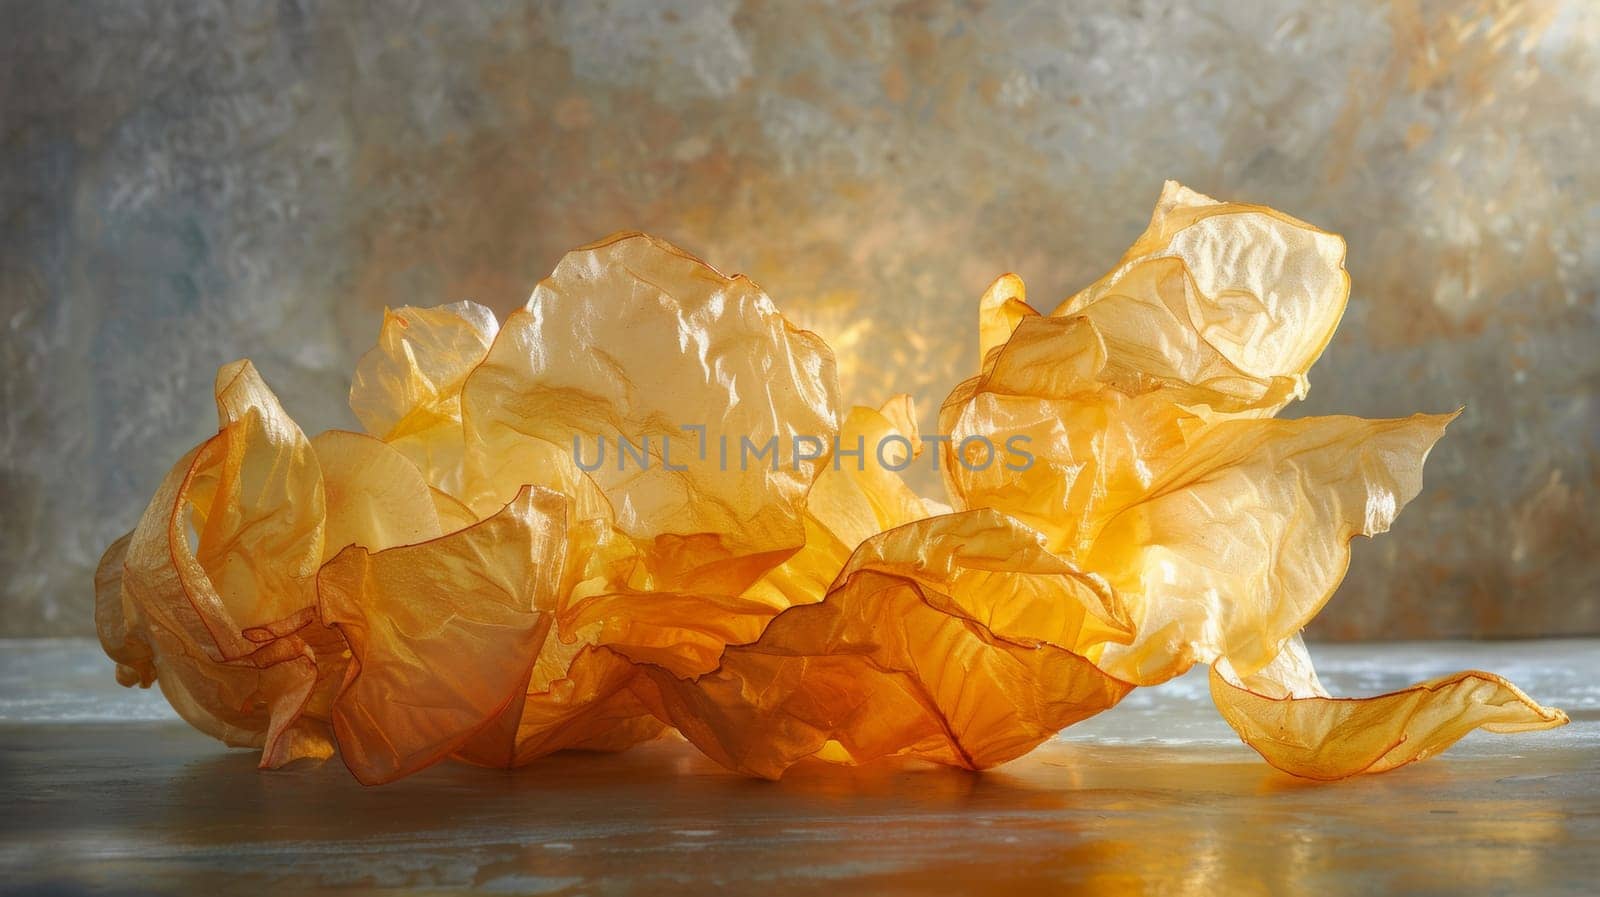 A pile of yellowed paper on a table with some water